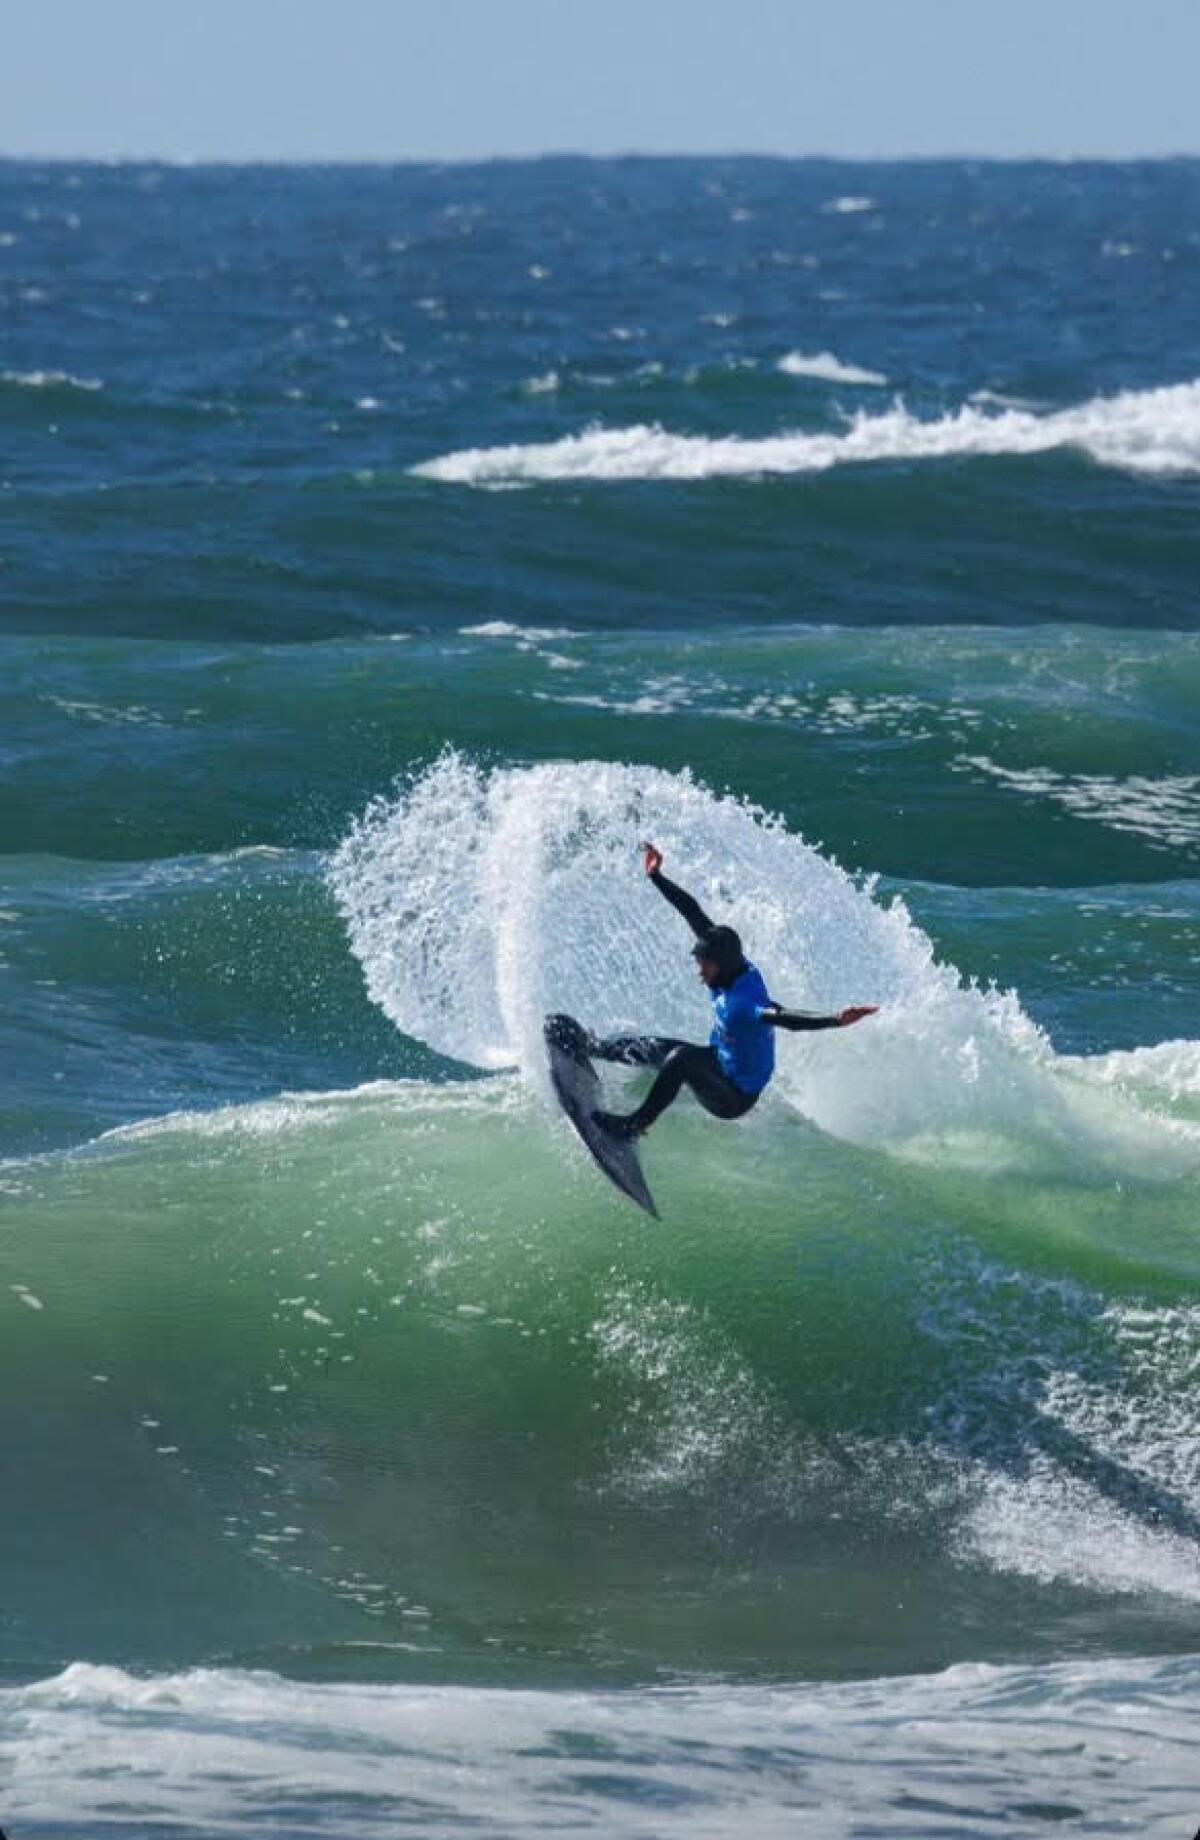 Moorpark resident Jonas Meskis is surfing at the World Championships in El Salvador this week.